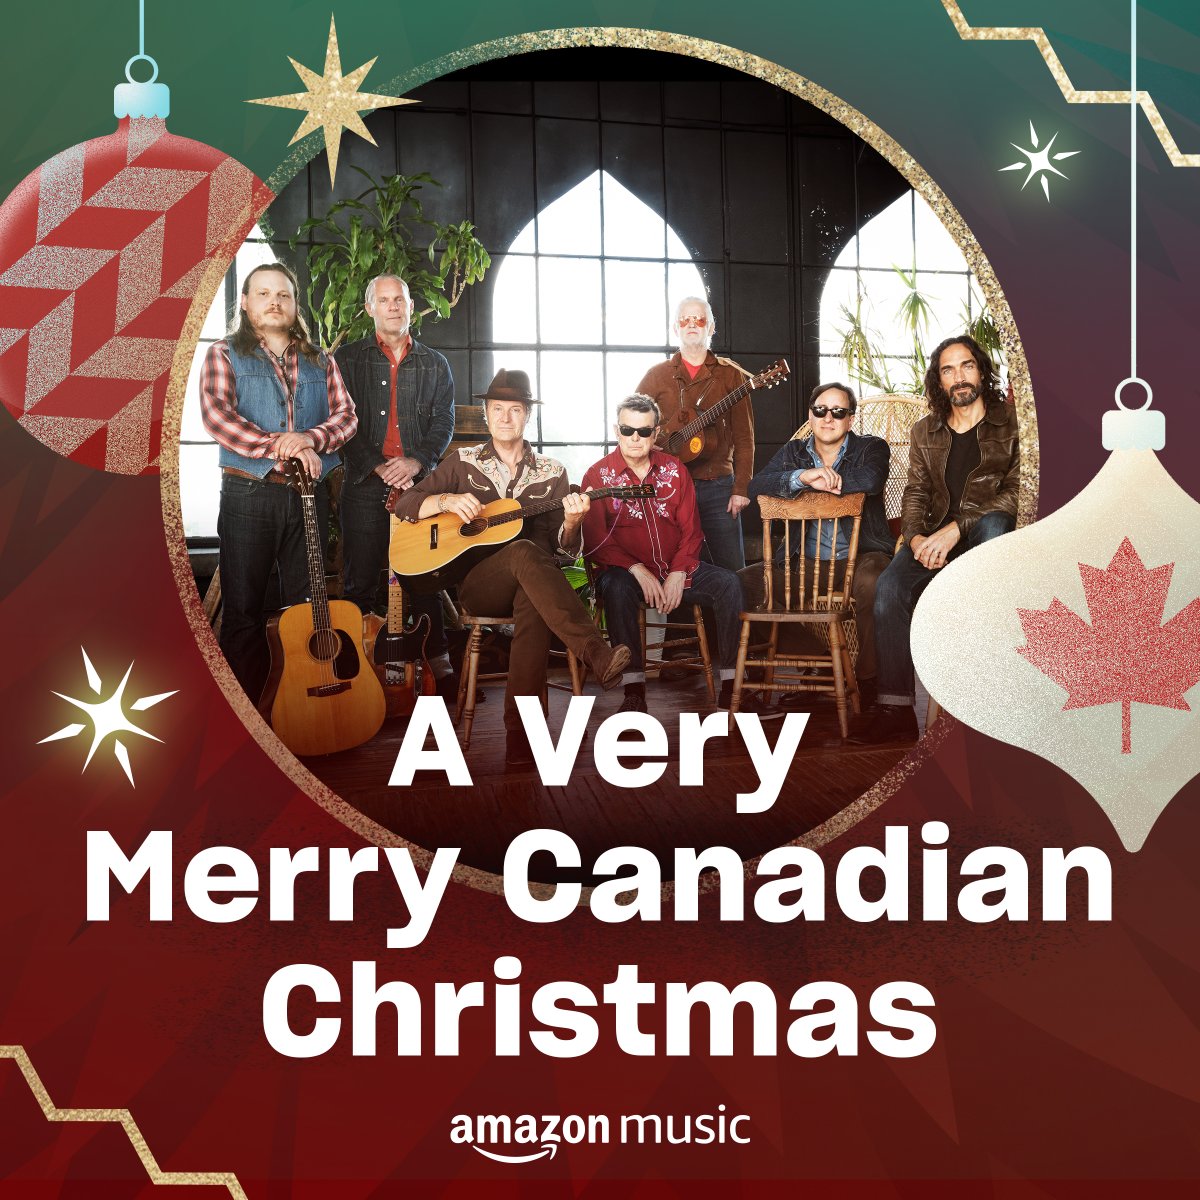 Getting into the holiday spirit? Check out @amazonmusic's playlist, A Very Merry Canadian Christmas! You can listen to our version of ‘Christmas Must Be Tonight’ and many other holiday classics! 📷 ow.ly/mihu50QgRIL